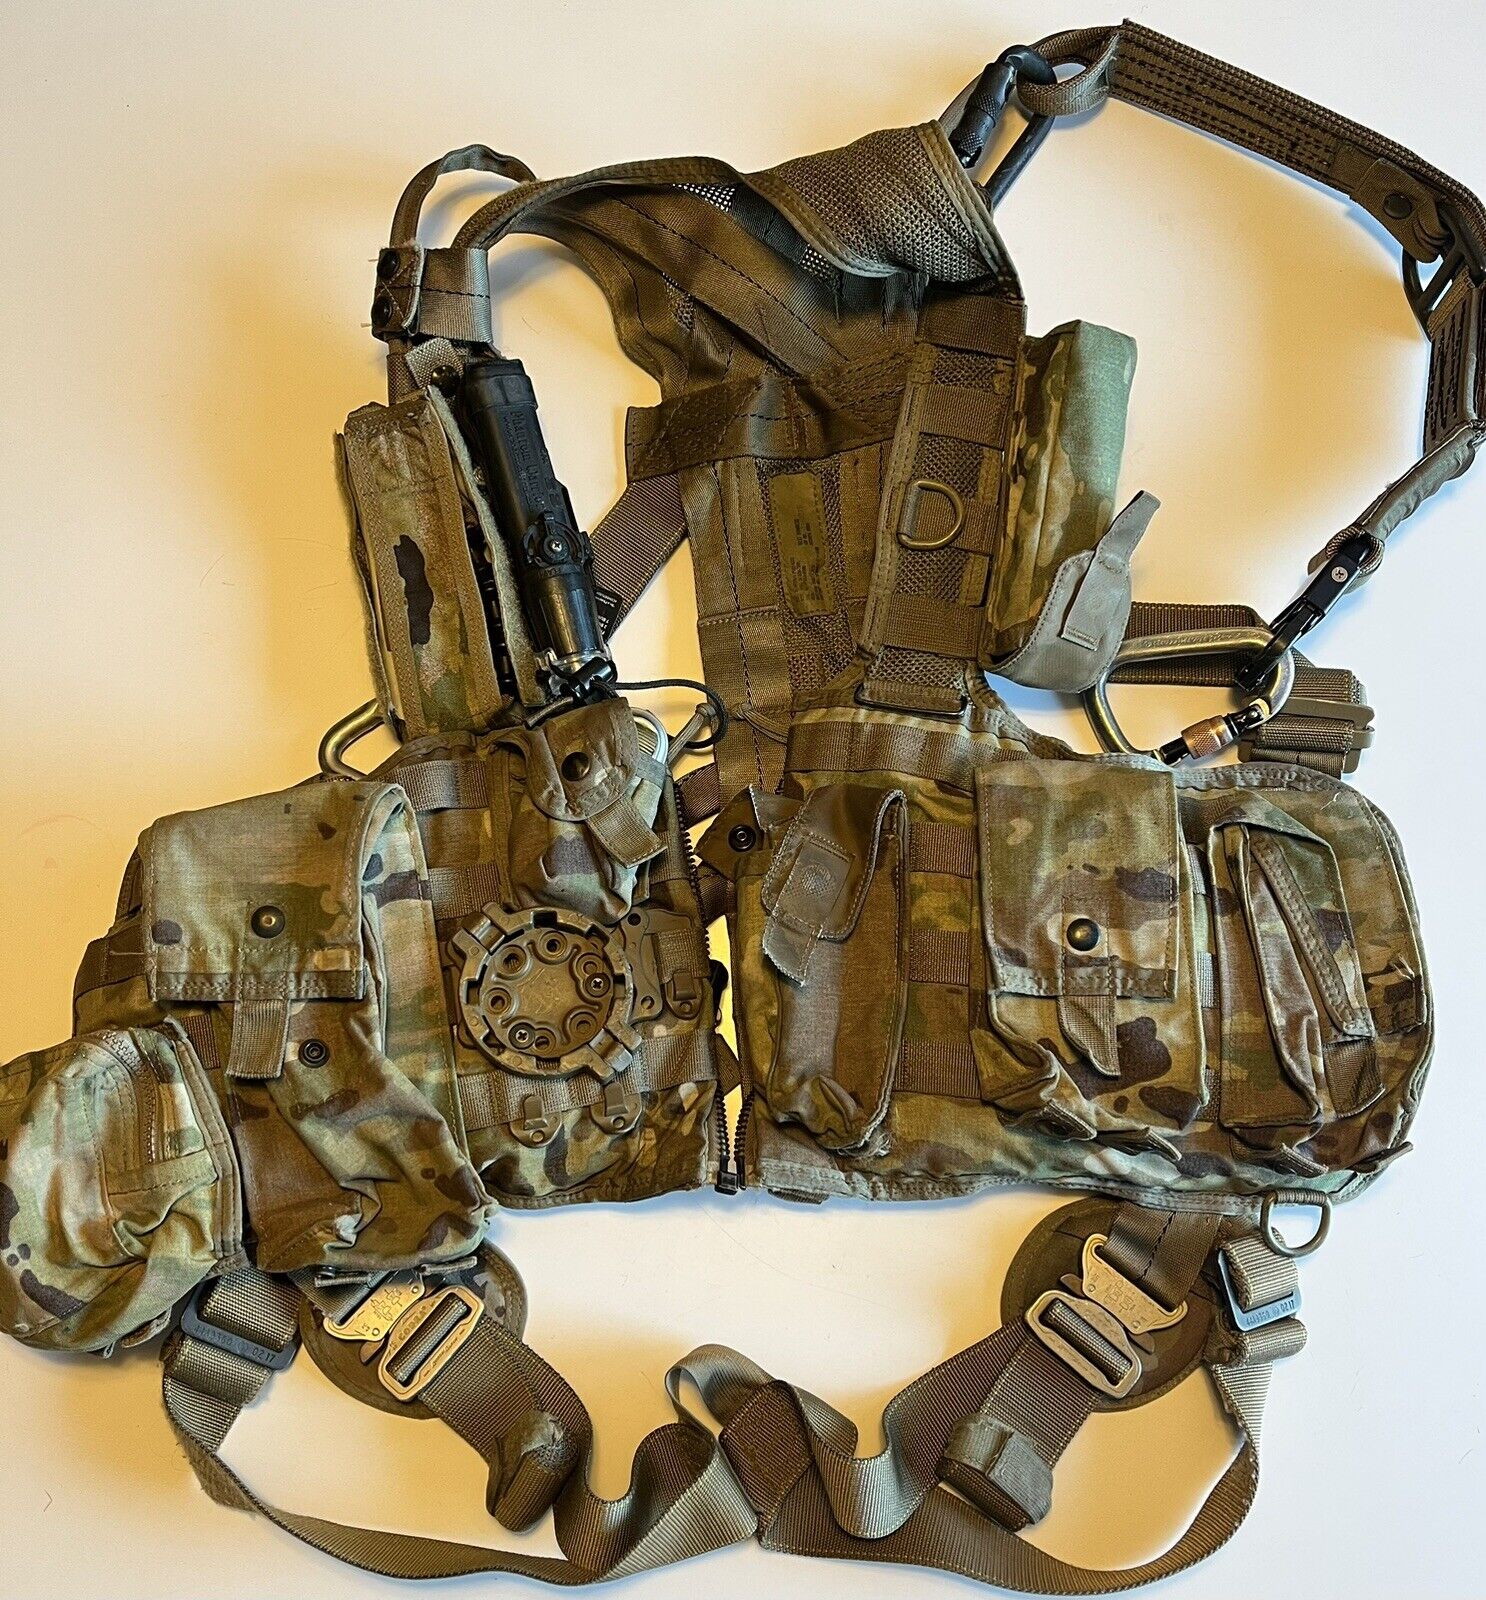 US Army ACU Air Warrior Vest Harness/Restraint System, Tether, Many Extras Too